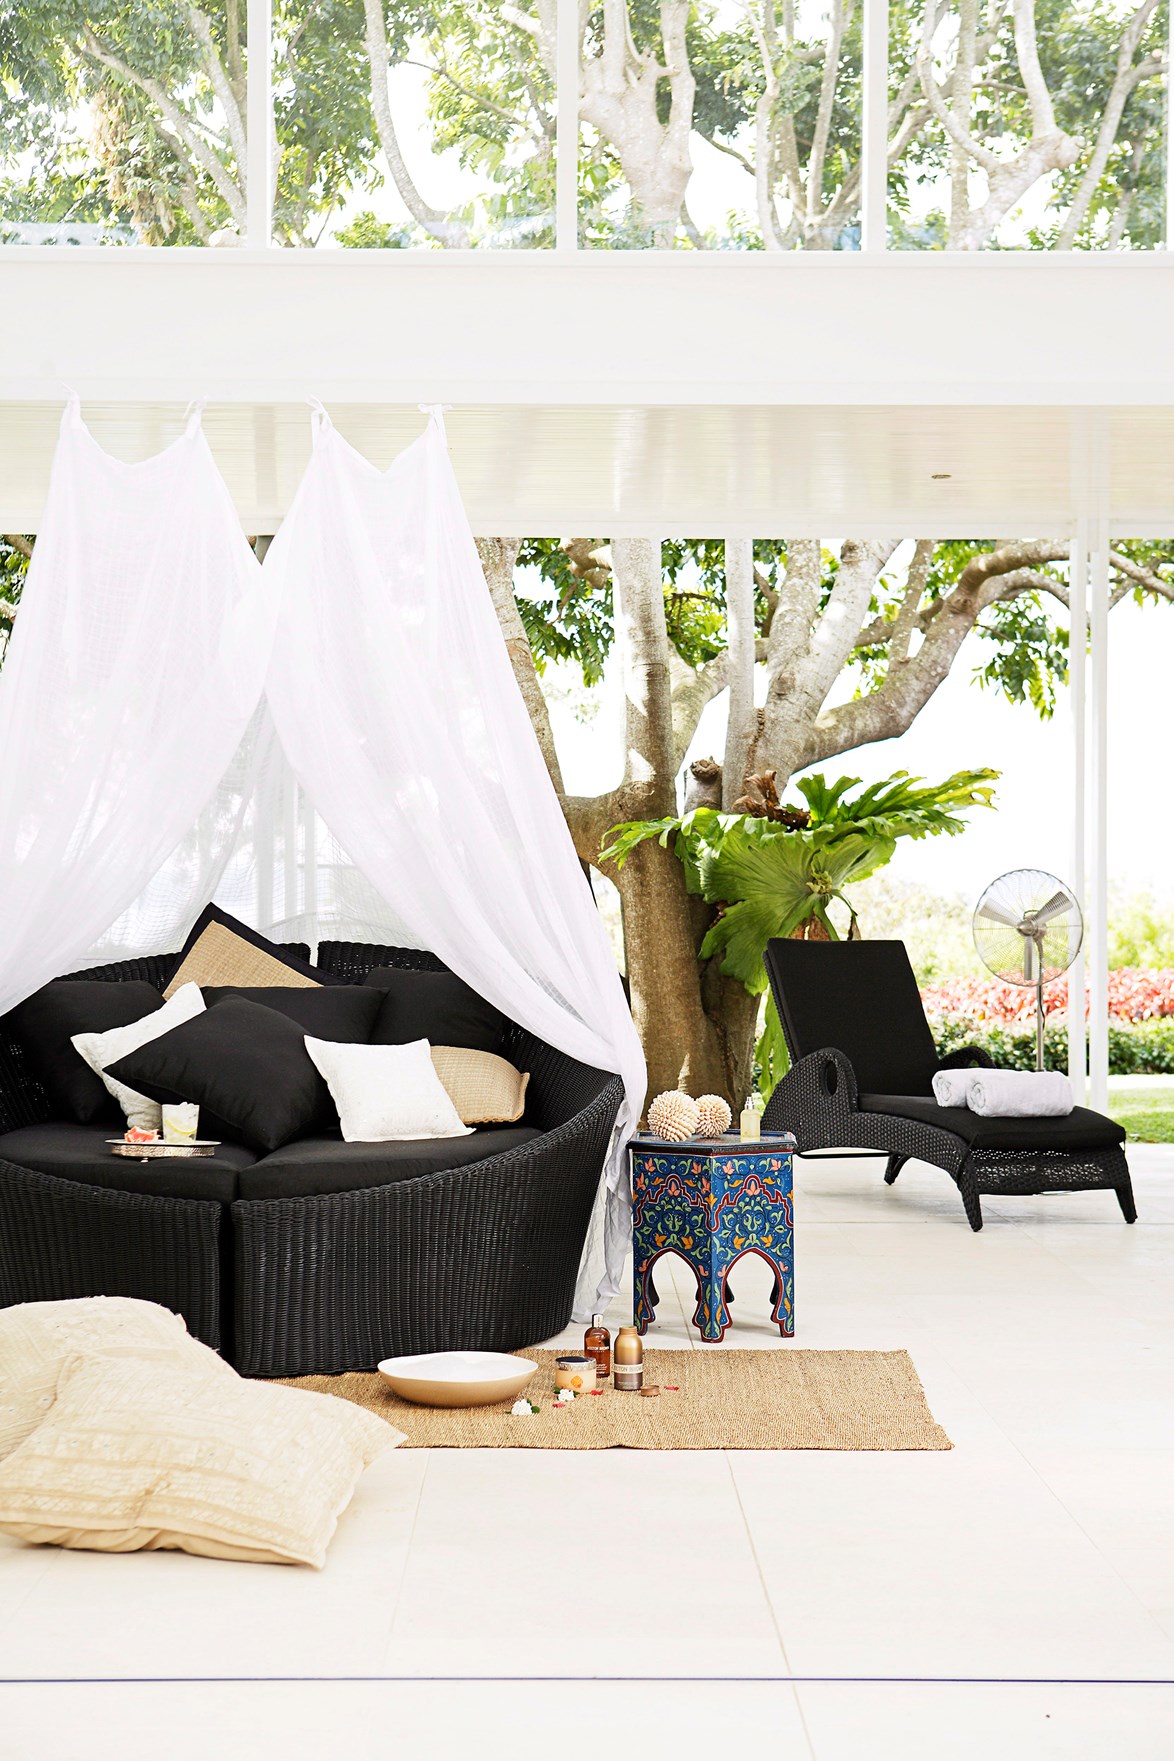 Consider creating a canopy and drape curtains around a plush [balcony daybed](https://www.homestolove.com.au/daybed-ideas-19586|target="_blank"). We may never be royals, but we can still live like royalty.